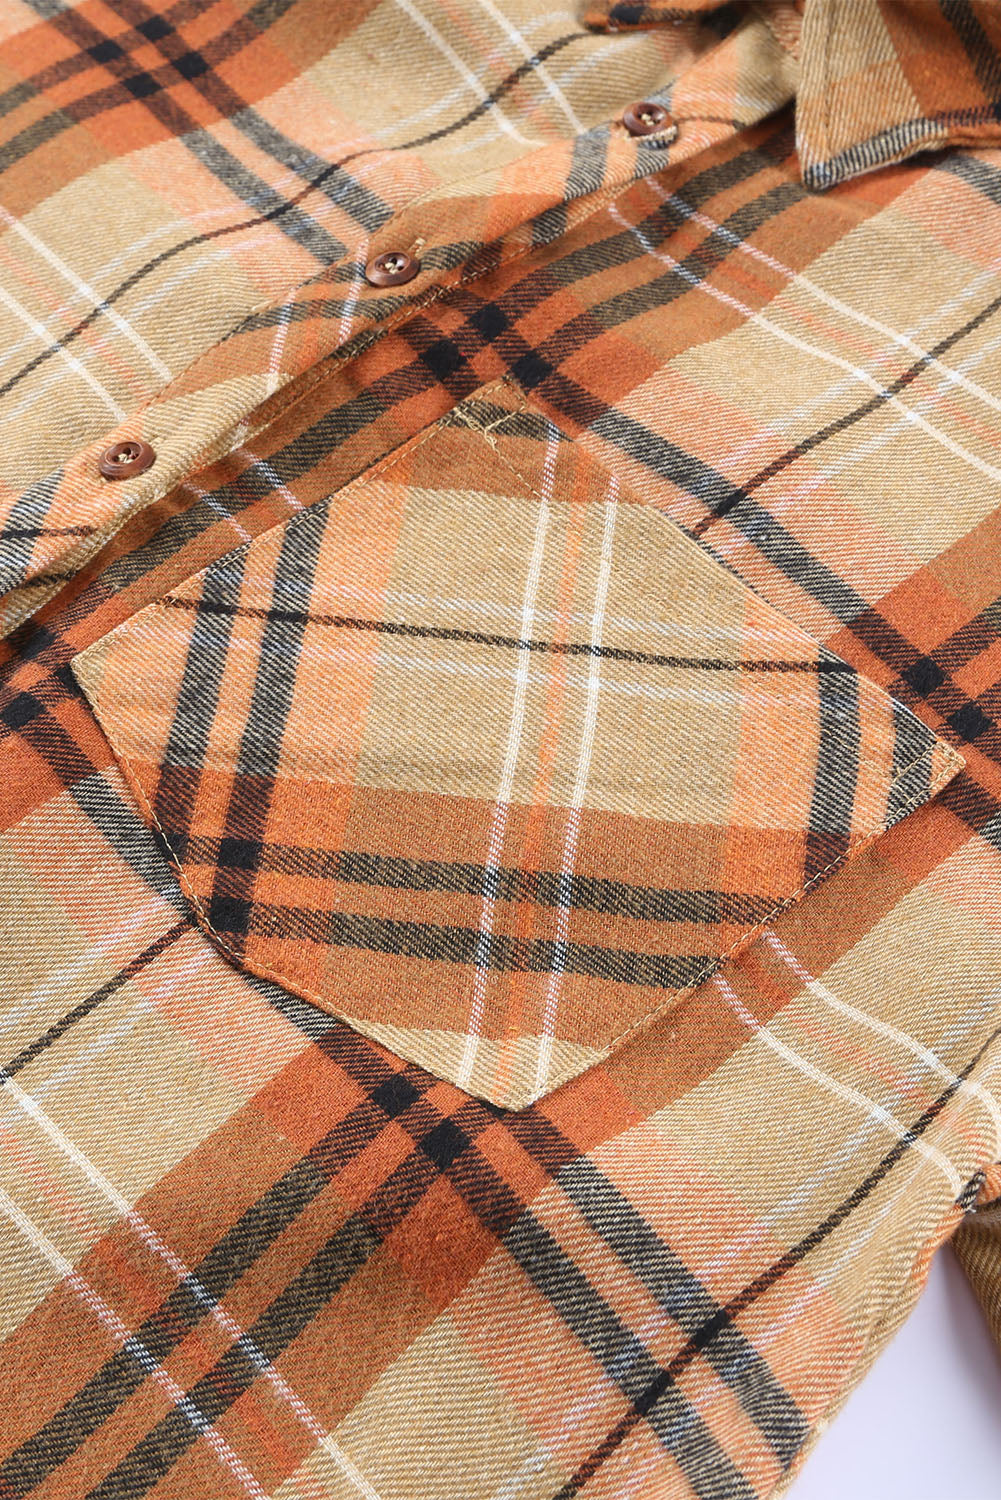 Fall Zest 100% Cotton Plaid Shirt | Hypoallergenic - Allergy Friendly - Naturally Free